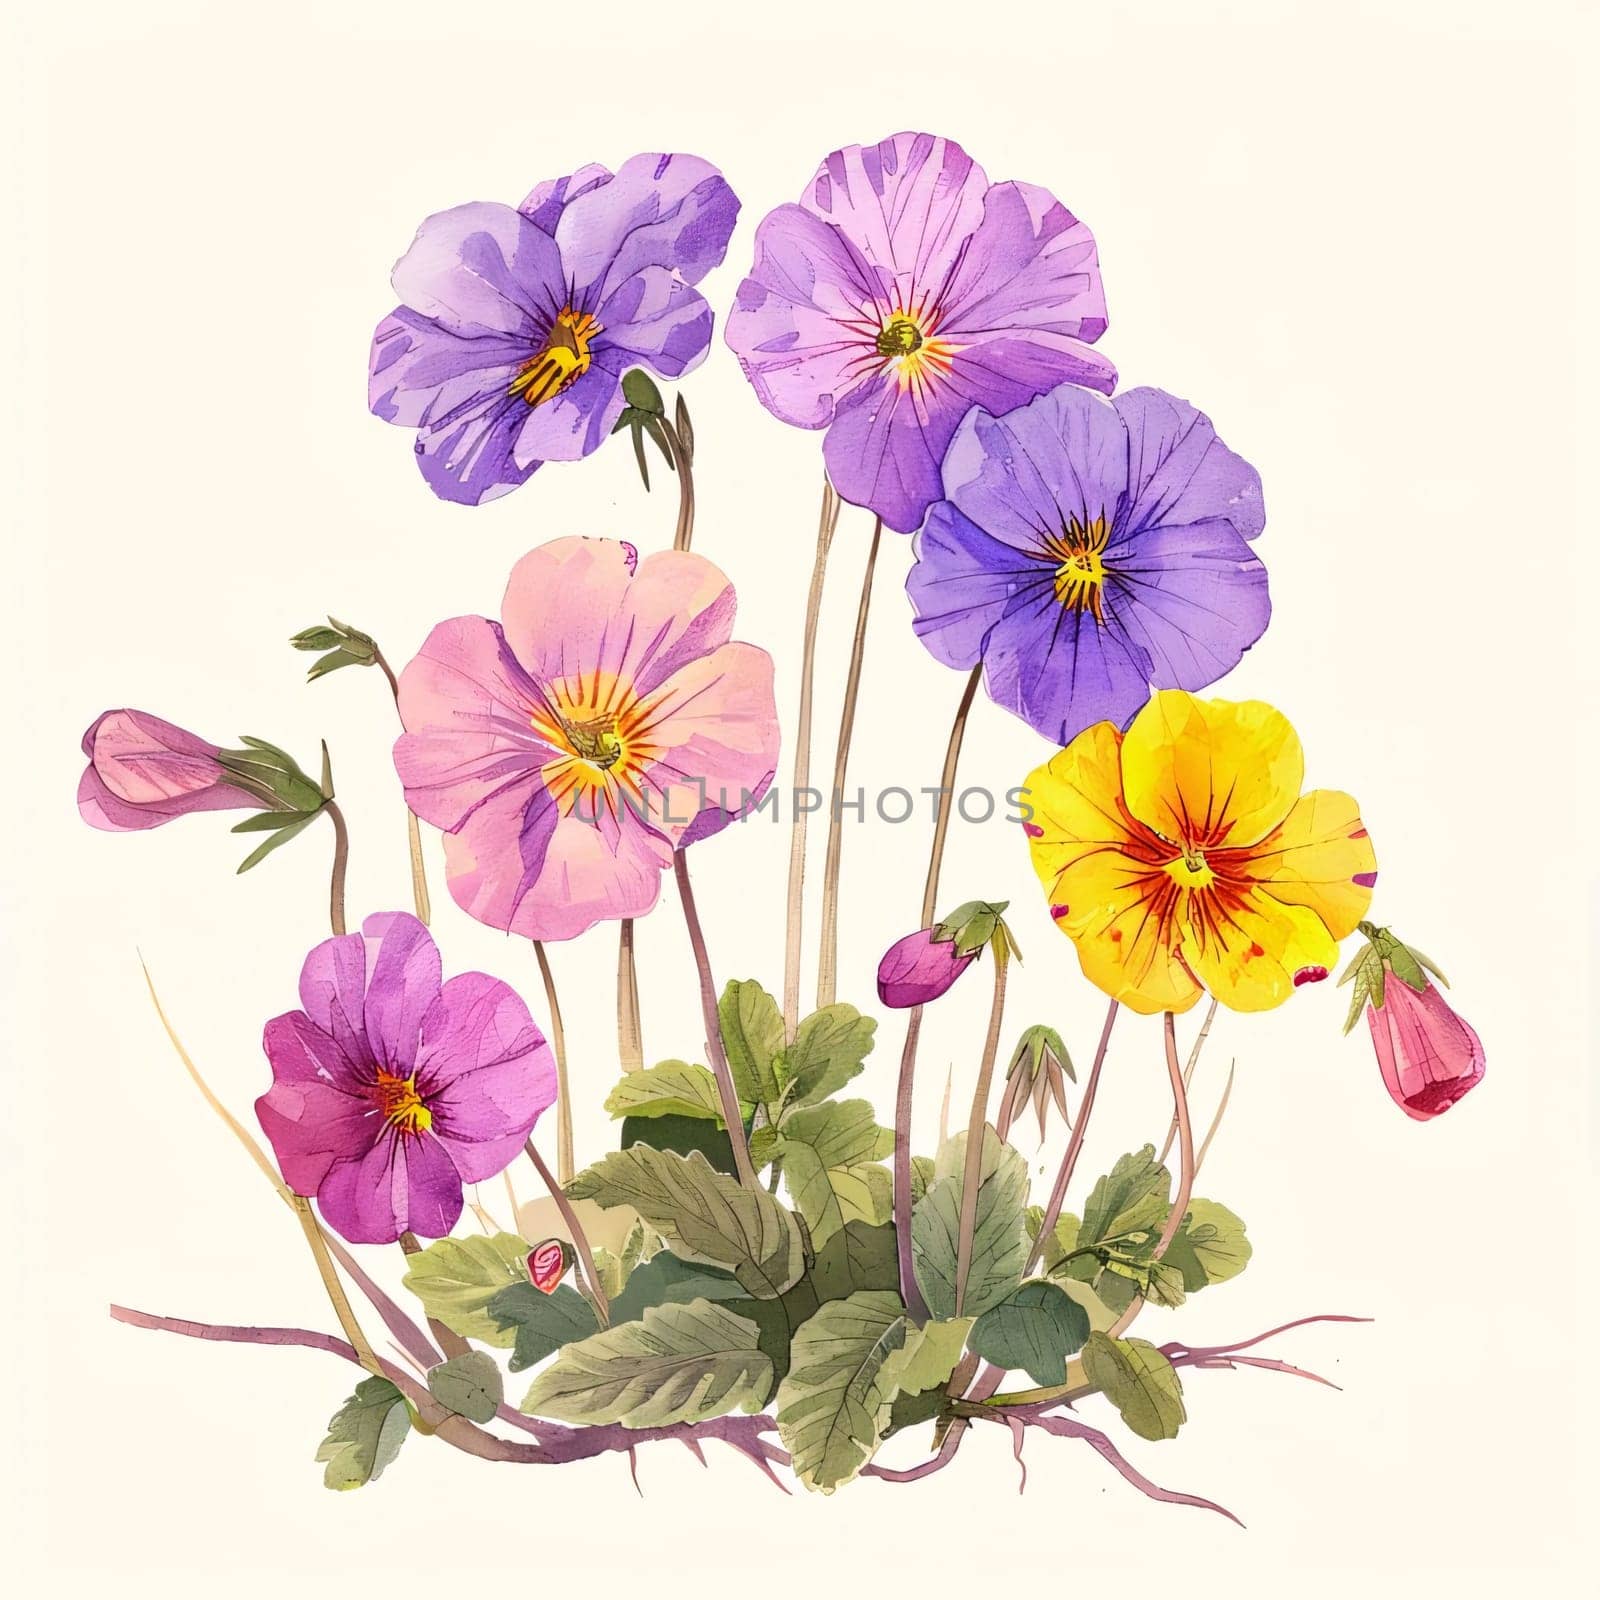 Drawn, painted flowers: purple and yellow pansies flowers with green stem and leaves. Flowering flowers, a symbol of spring, new life. by ThemesS